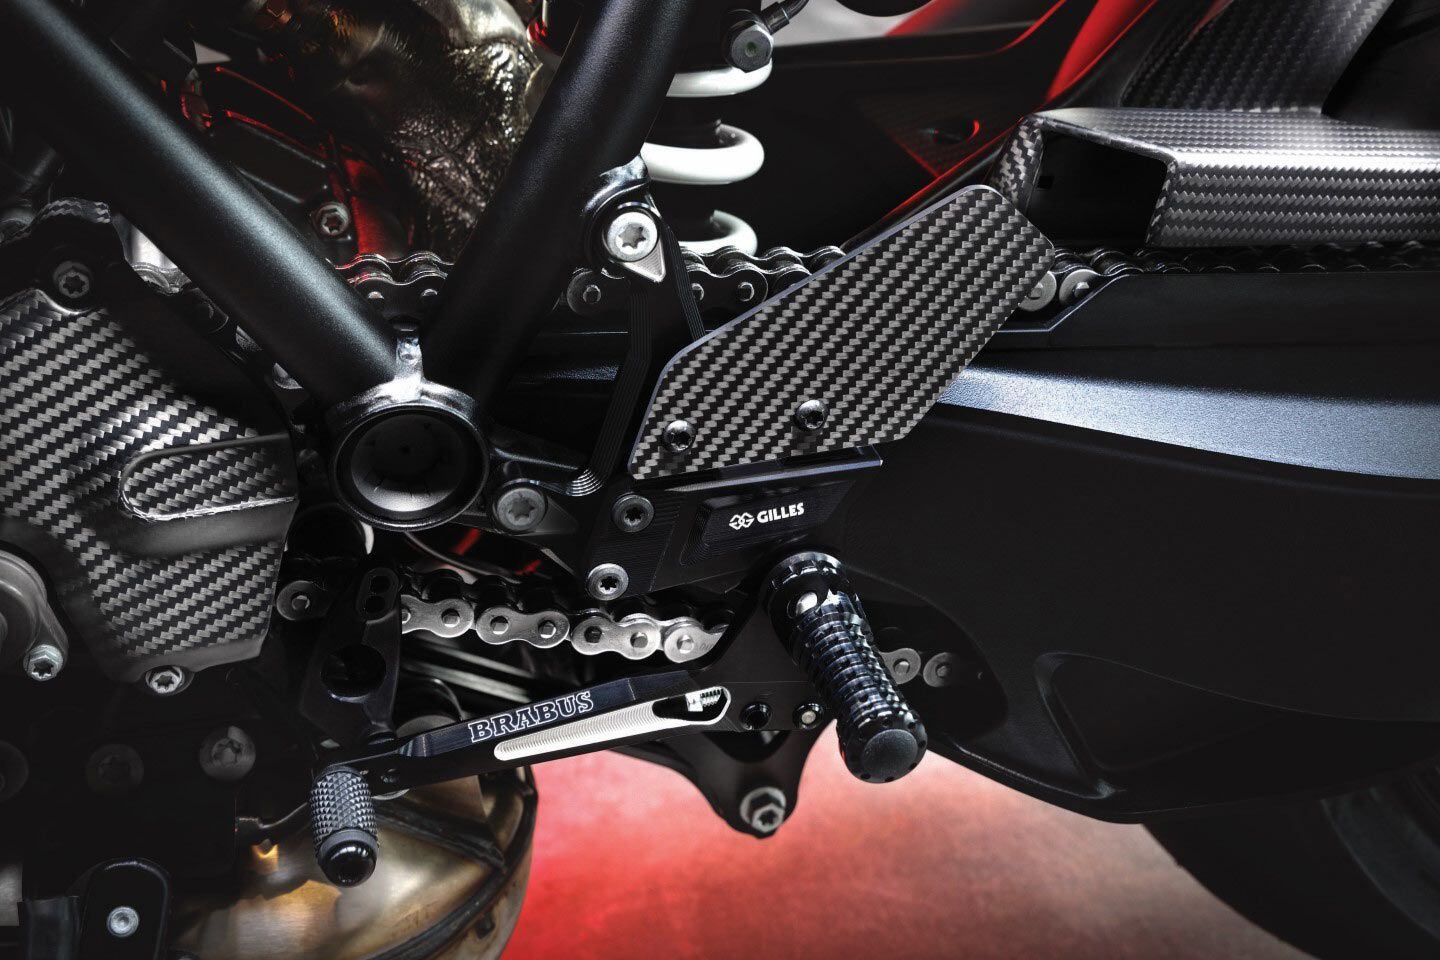 The 1300 R gets Gilles rearsets.